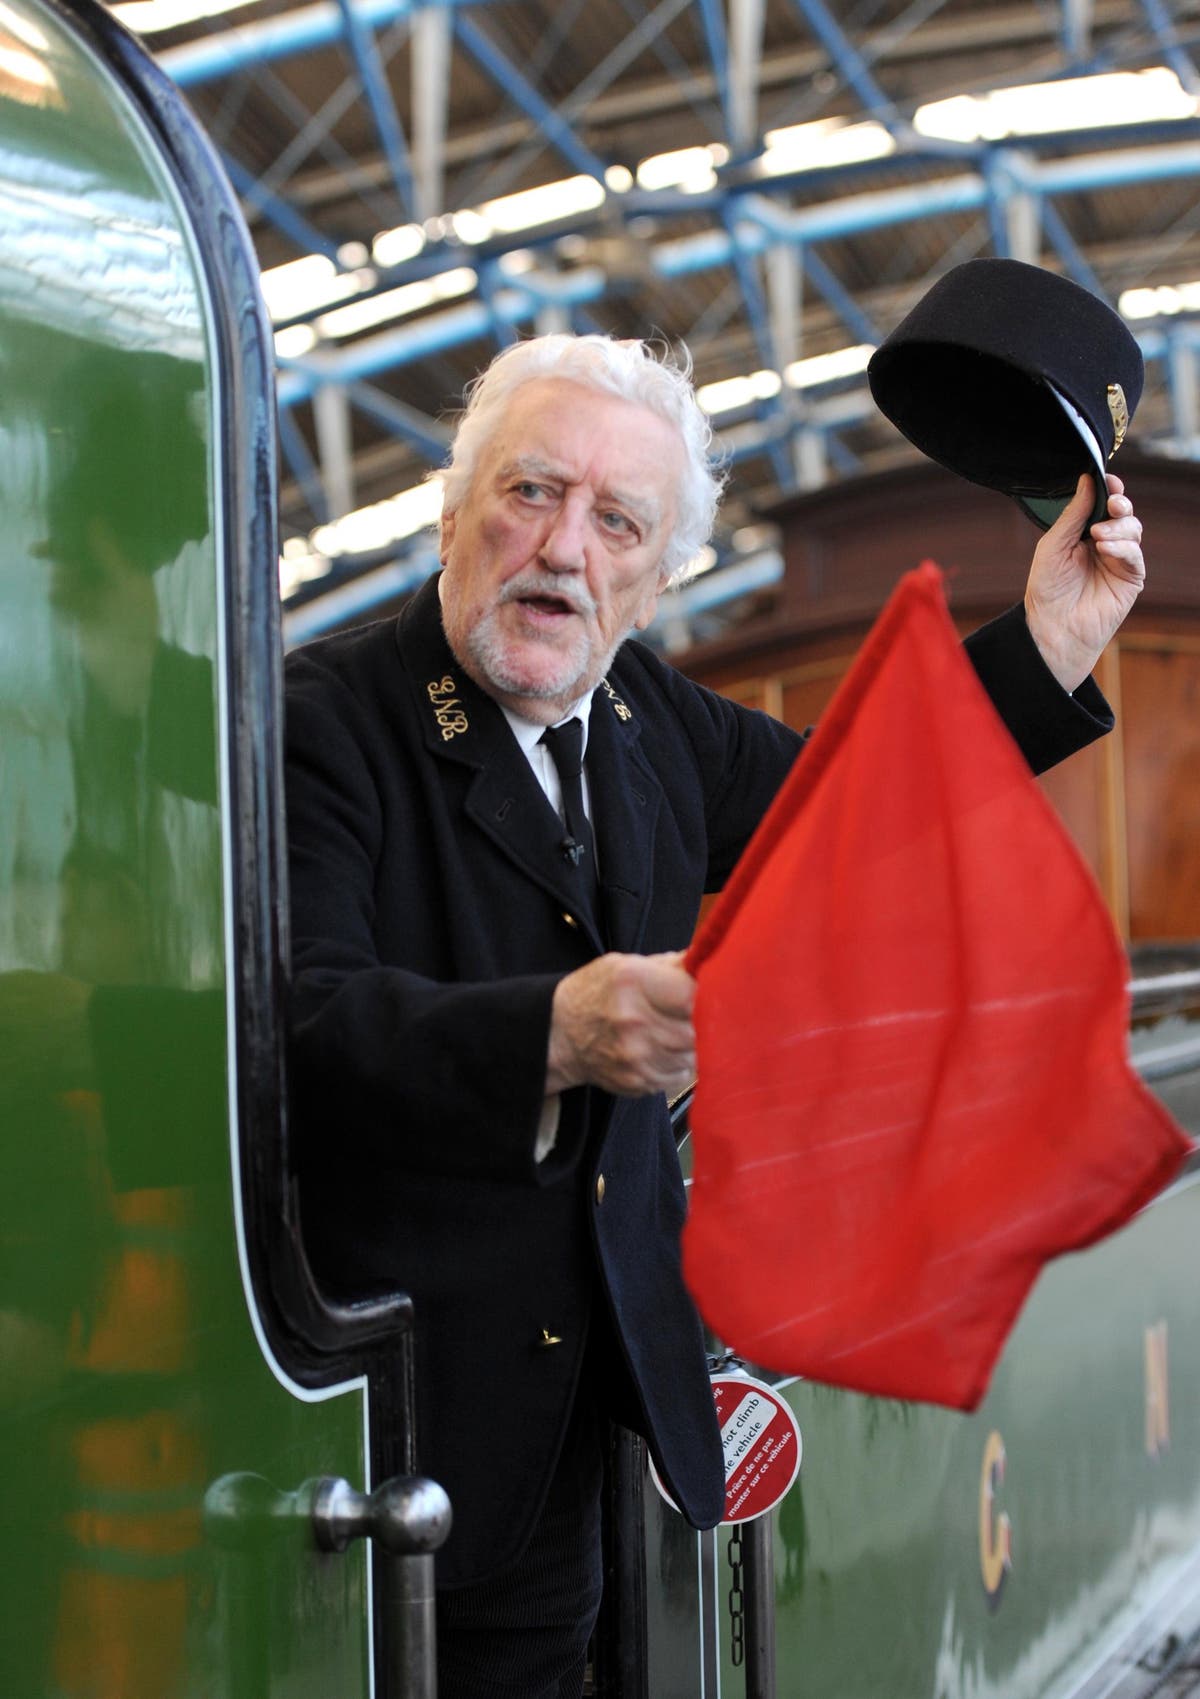 Bernard Cribbins remembered as a ‘creative genius’ by leading TV figures